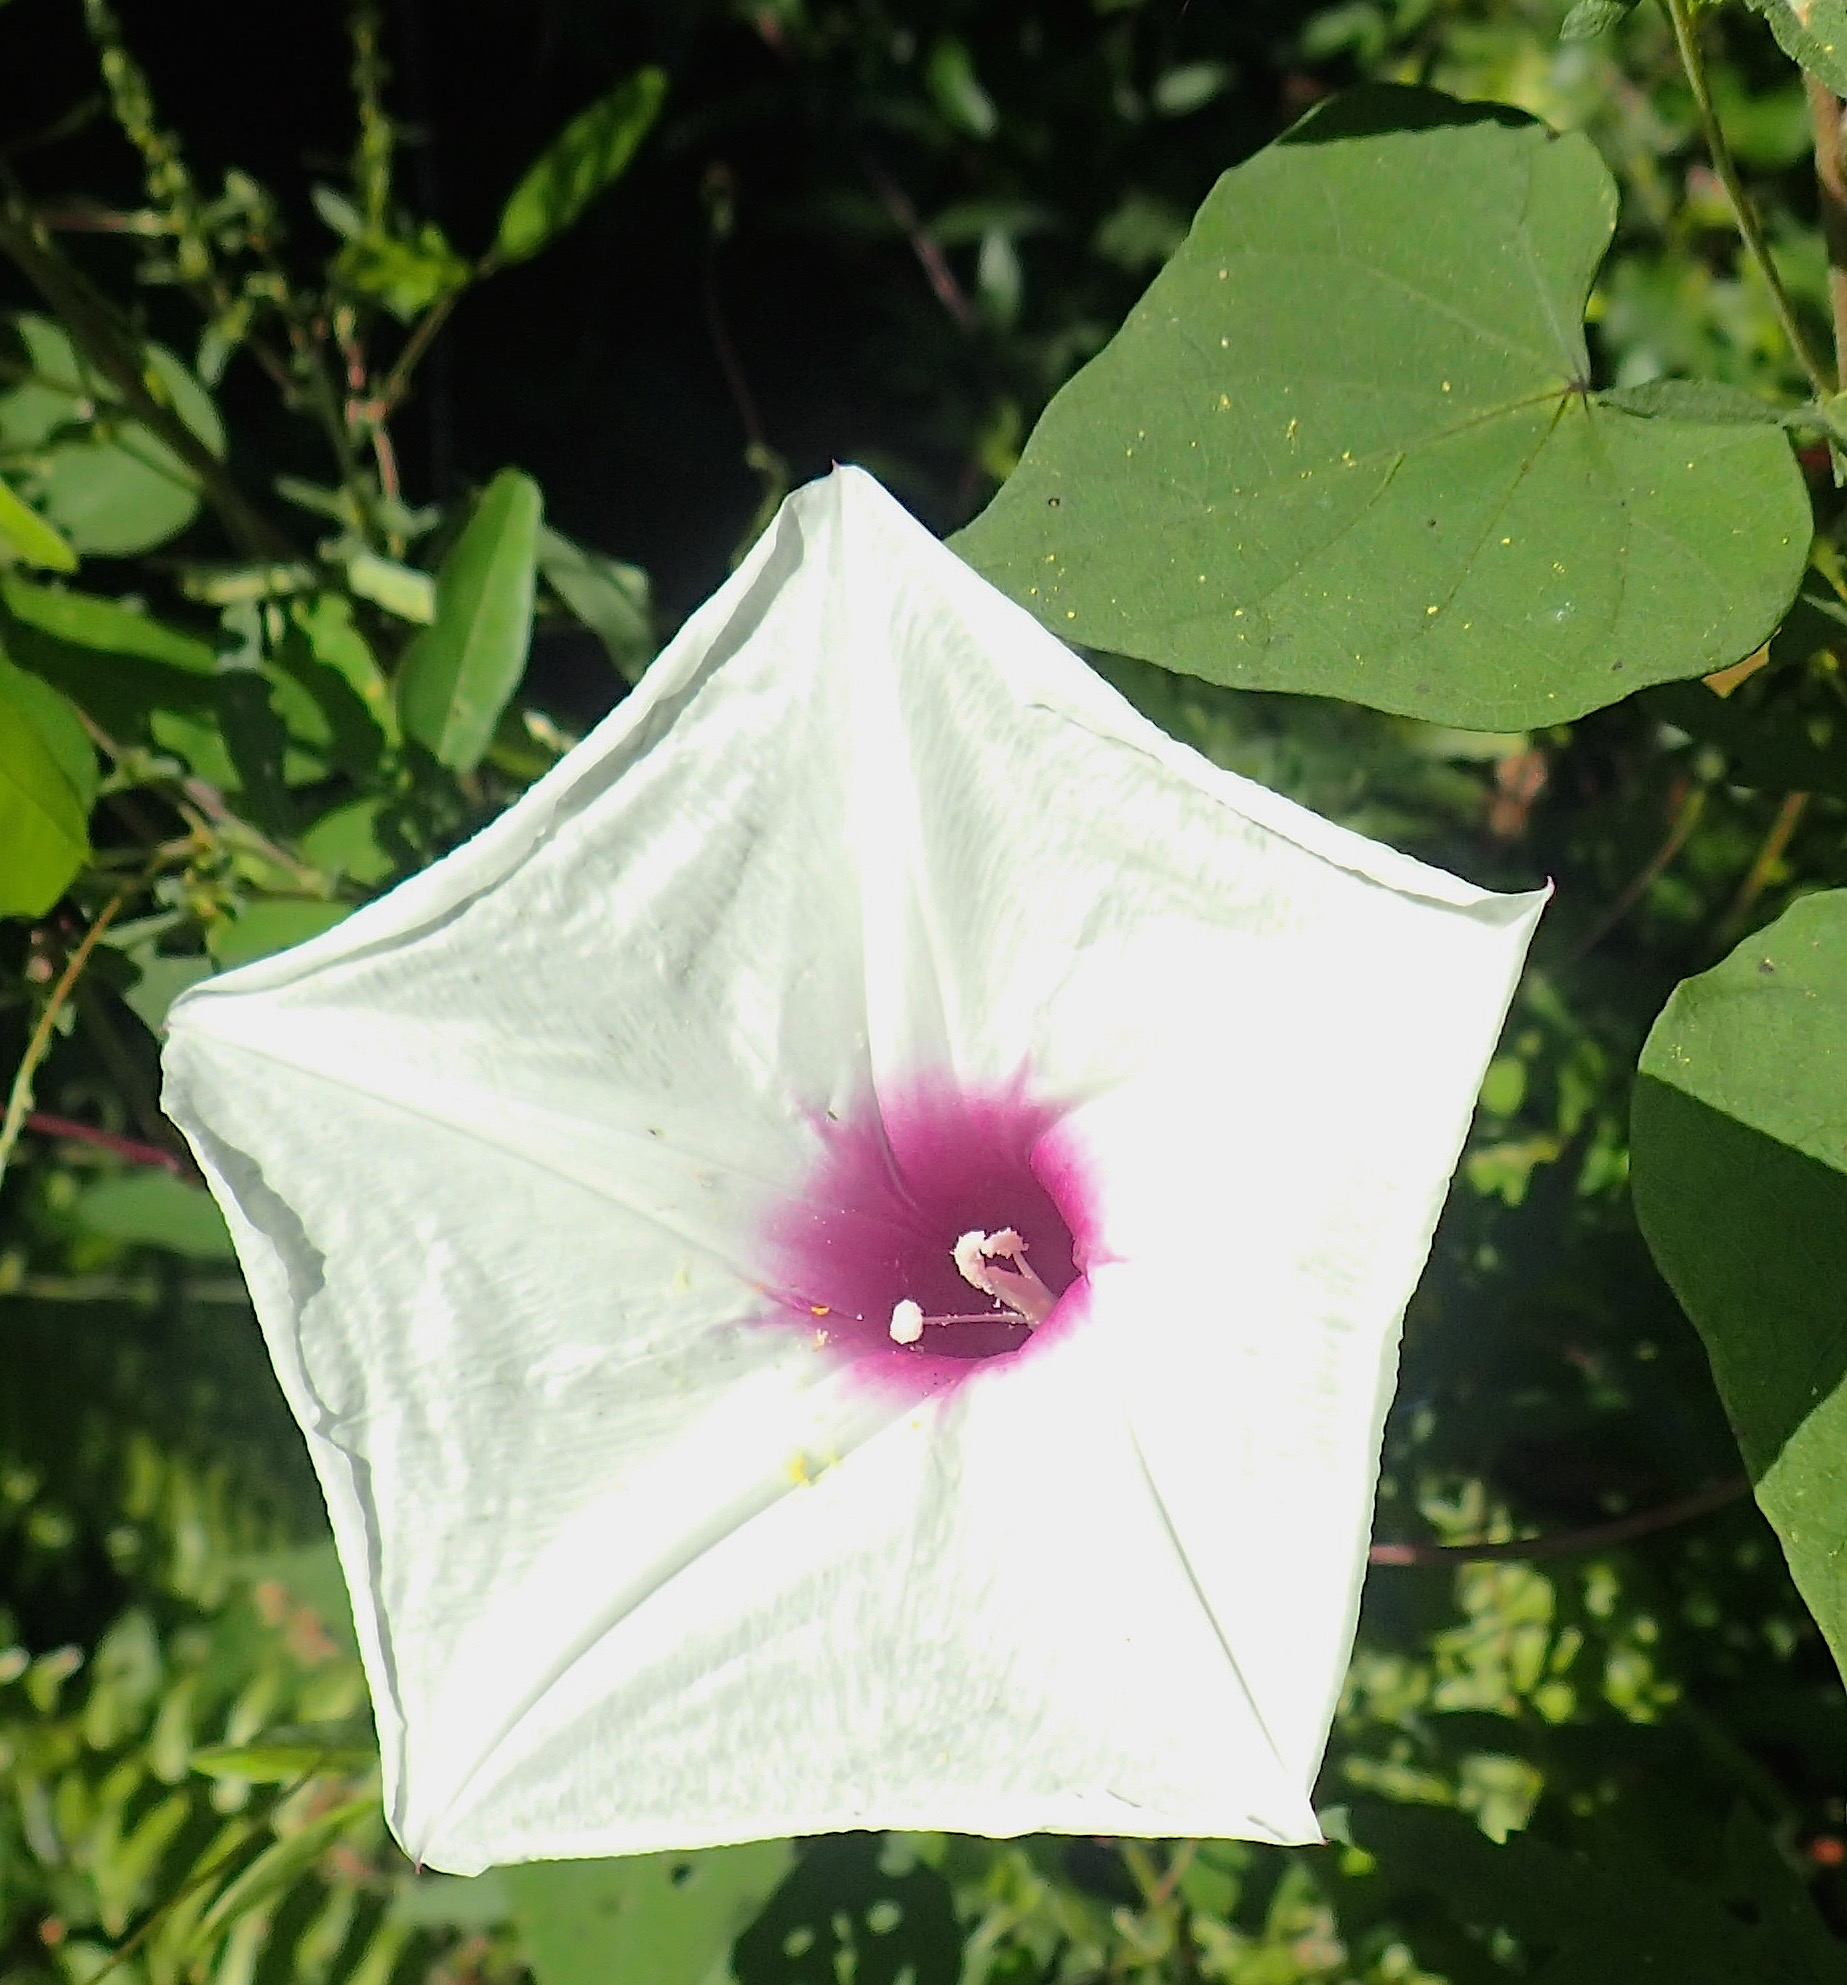 Look for large Morning Glory blossoms that are white or white with ruby throats. Photo by Green Deane